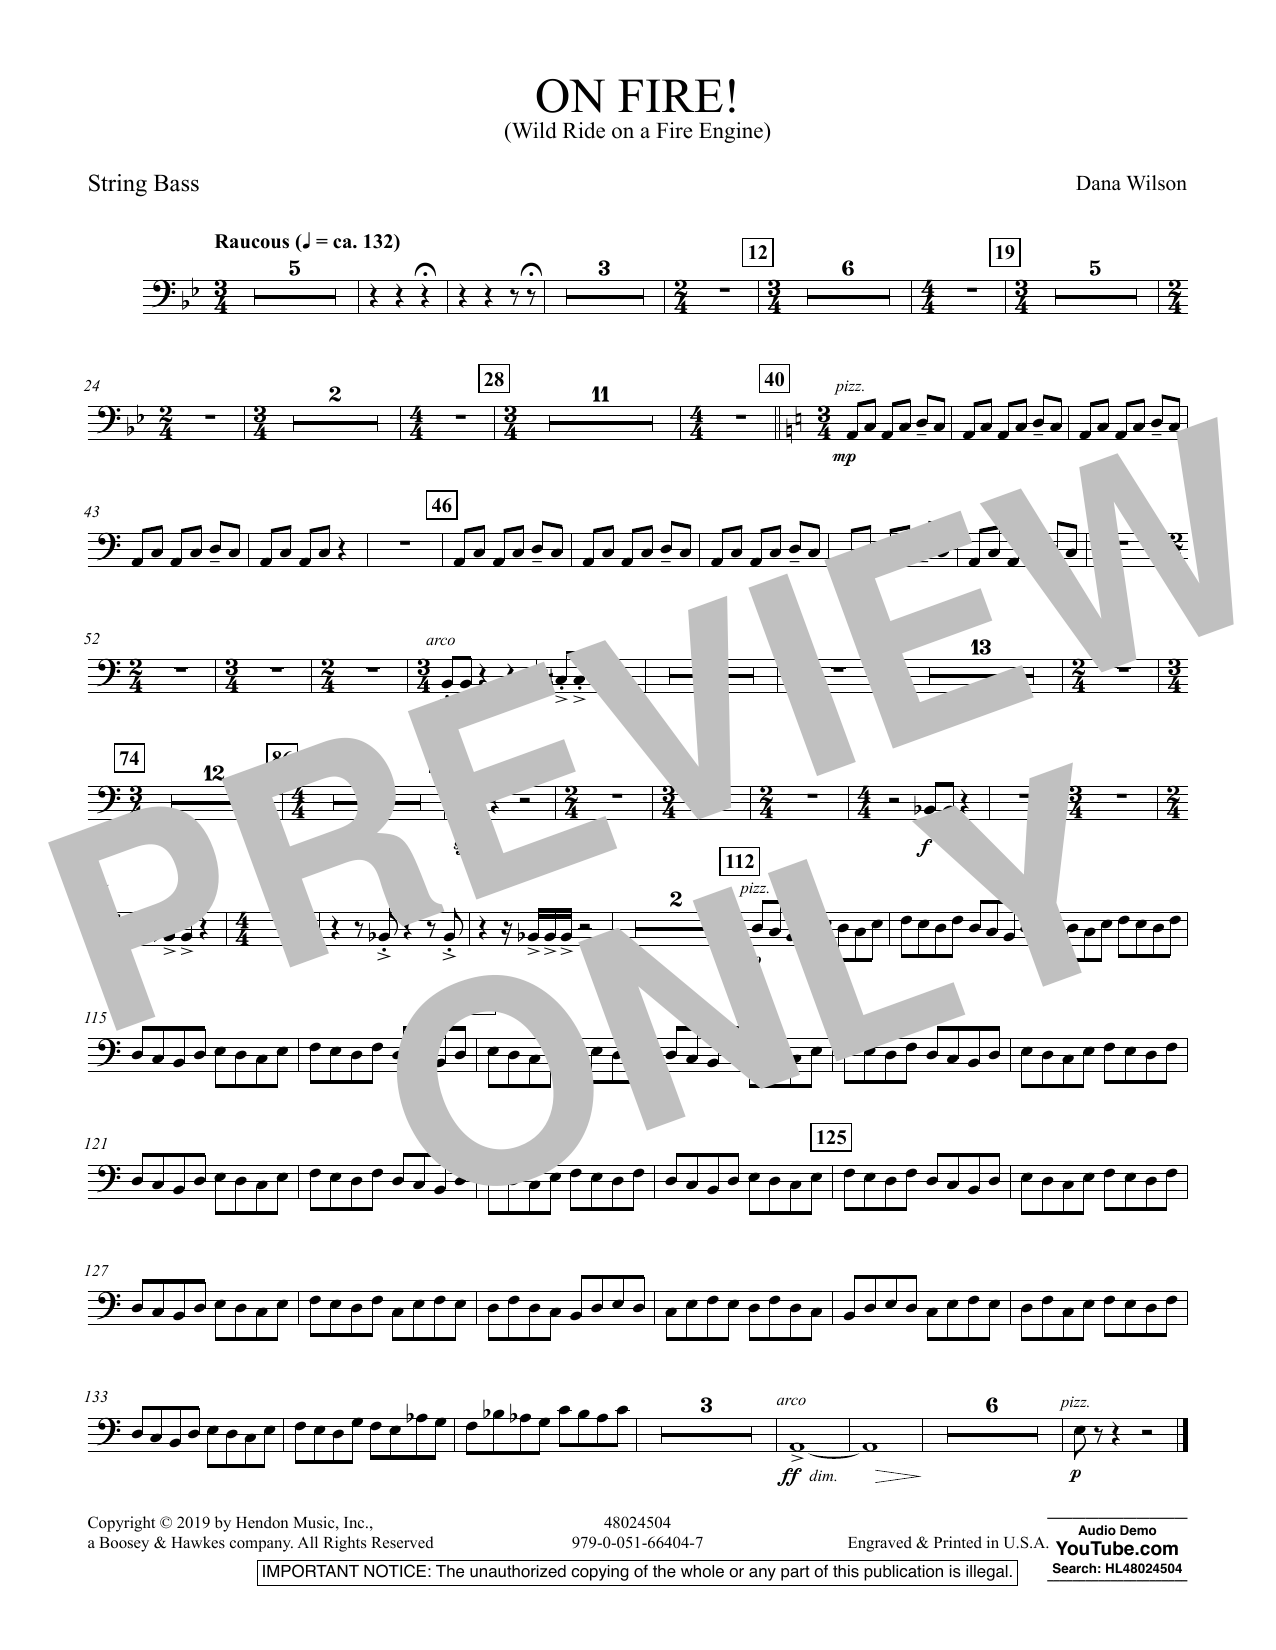 Dana Wilson On Fire! (Wild Ride on a Fire Engine) - String Bass sheet music preview music notes and score for Concert Band including 1 page(s)